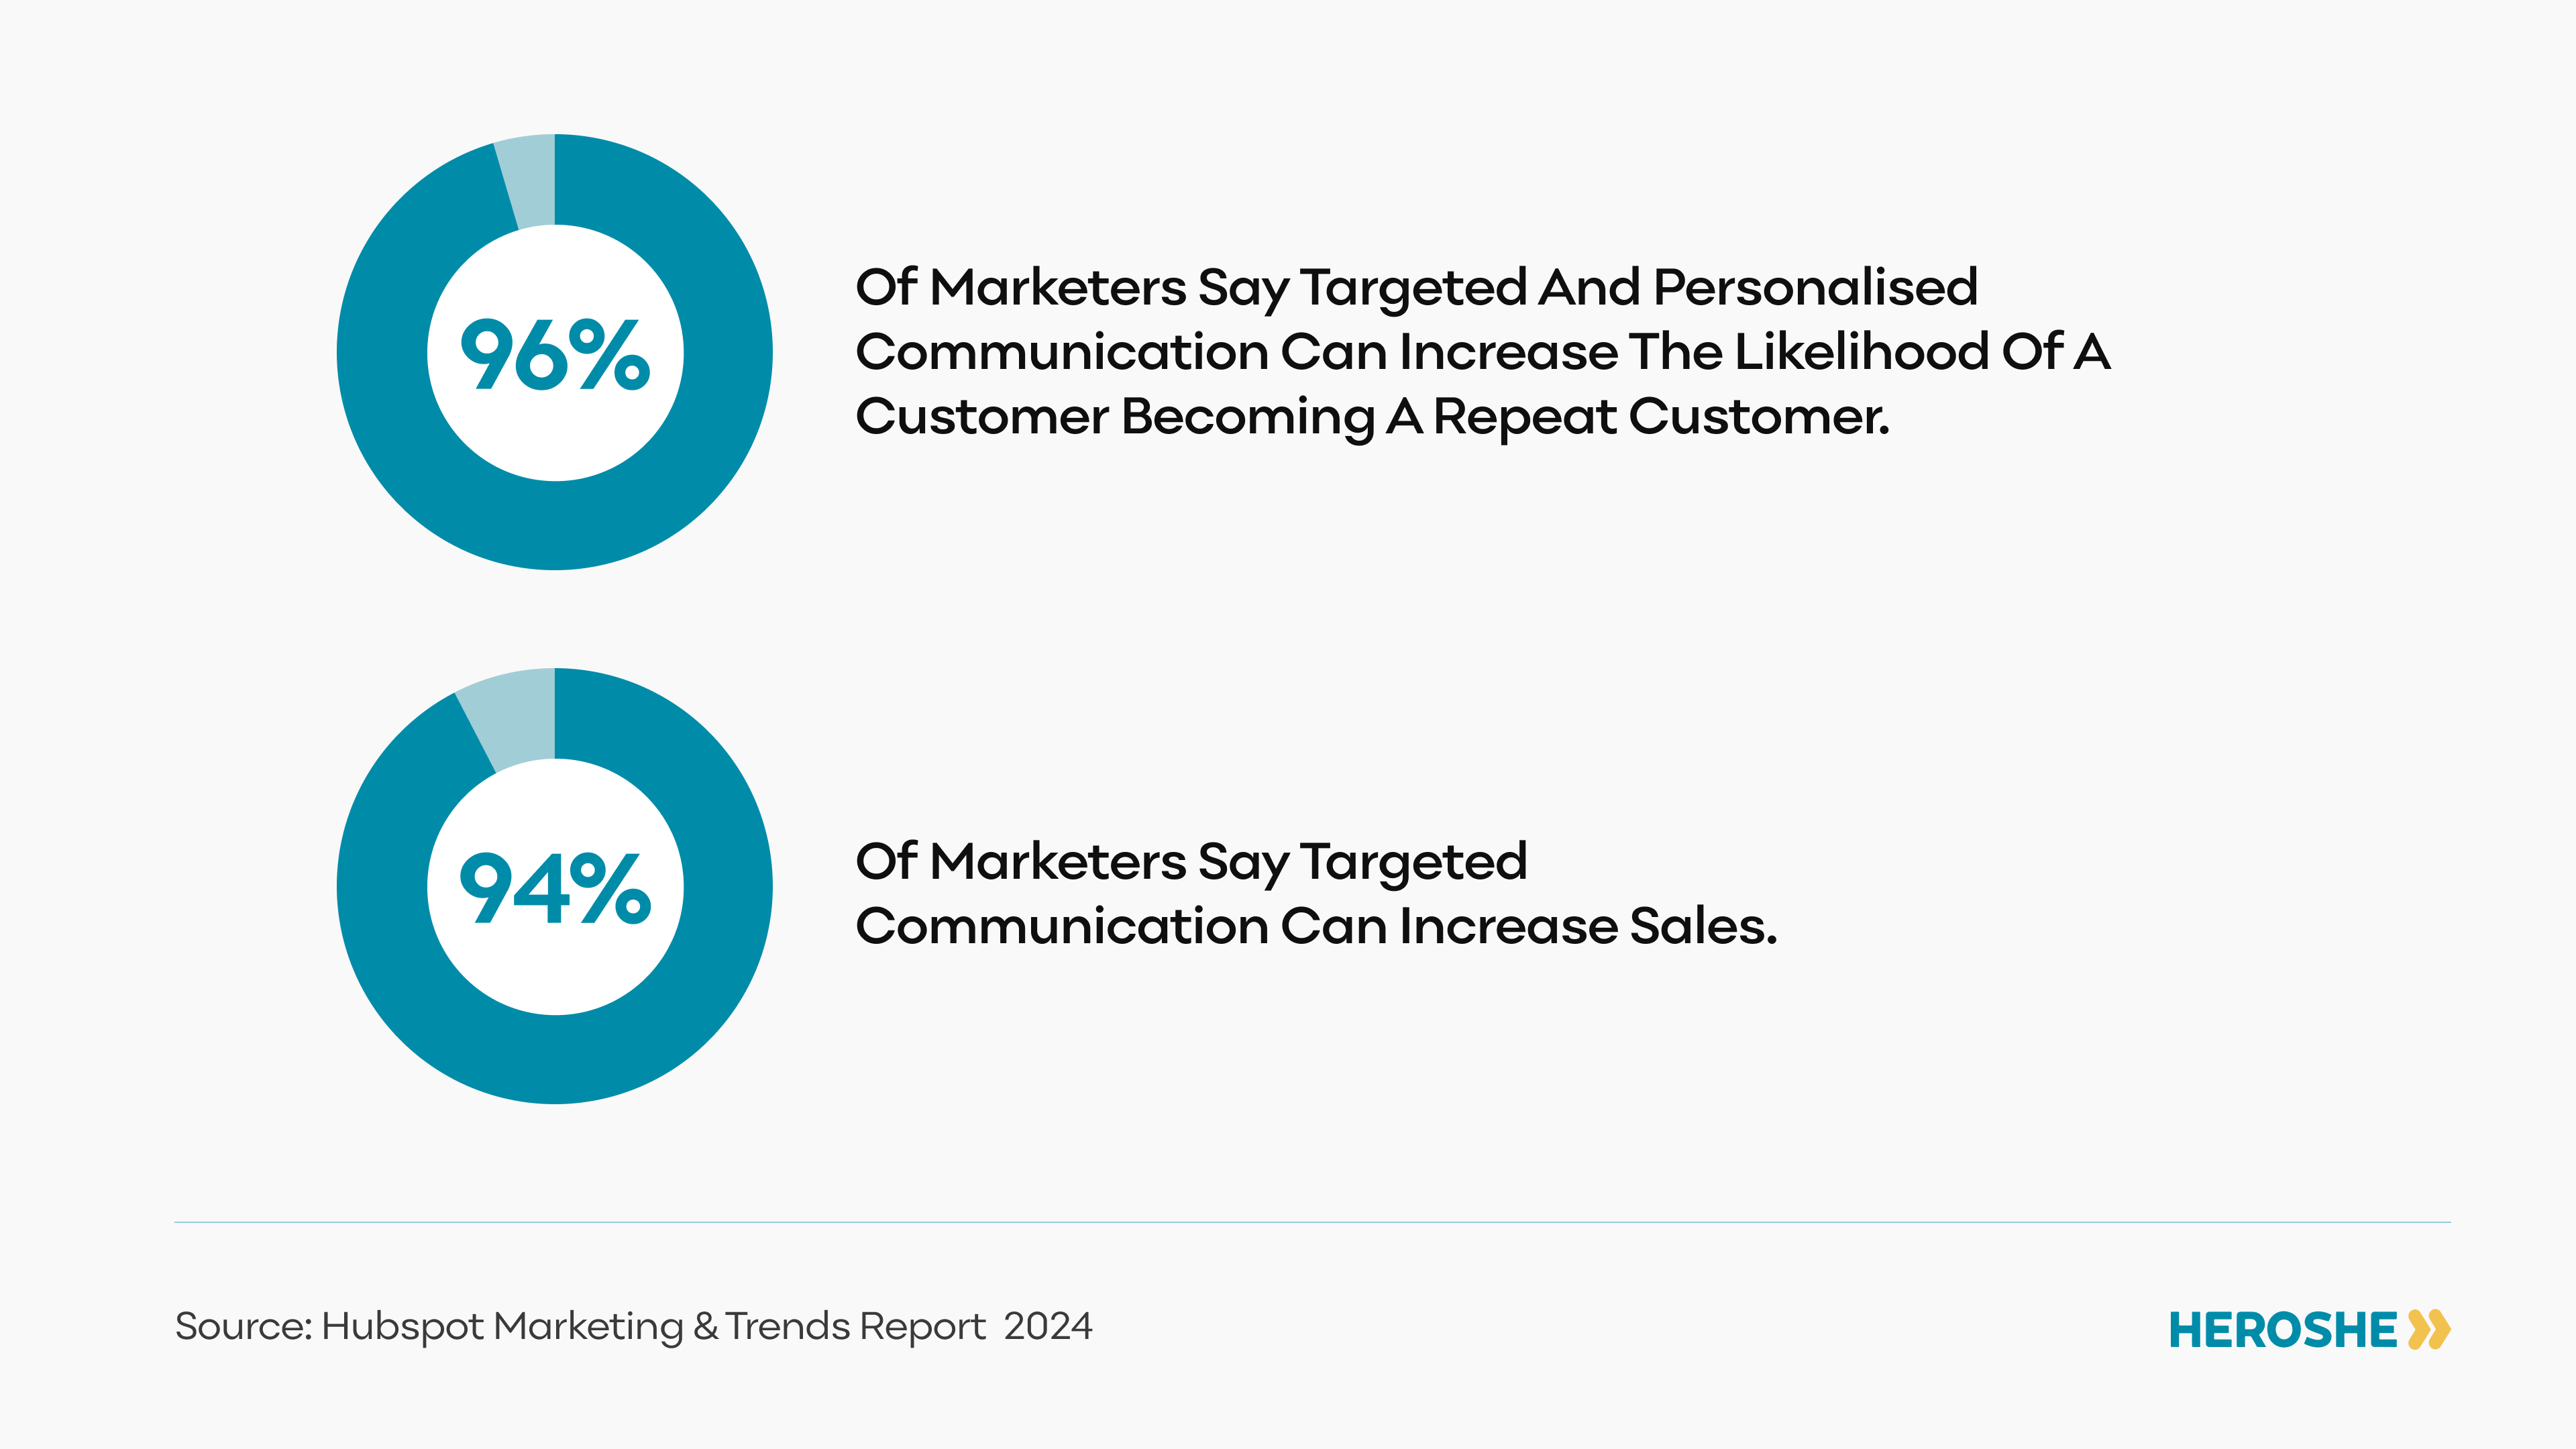 Marketing and trends report